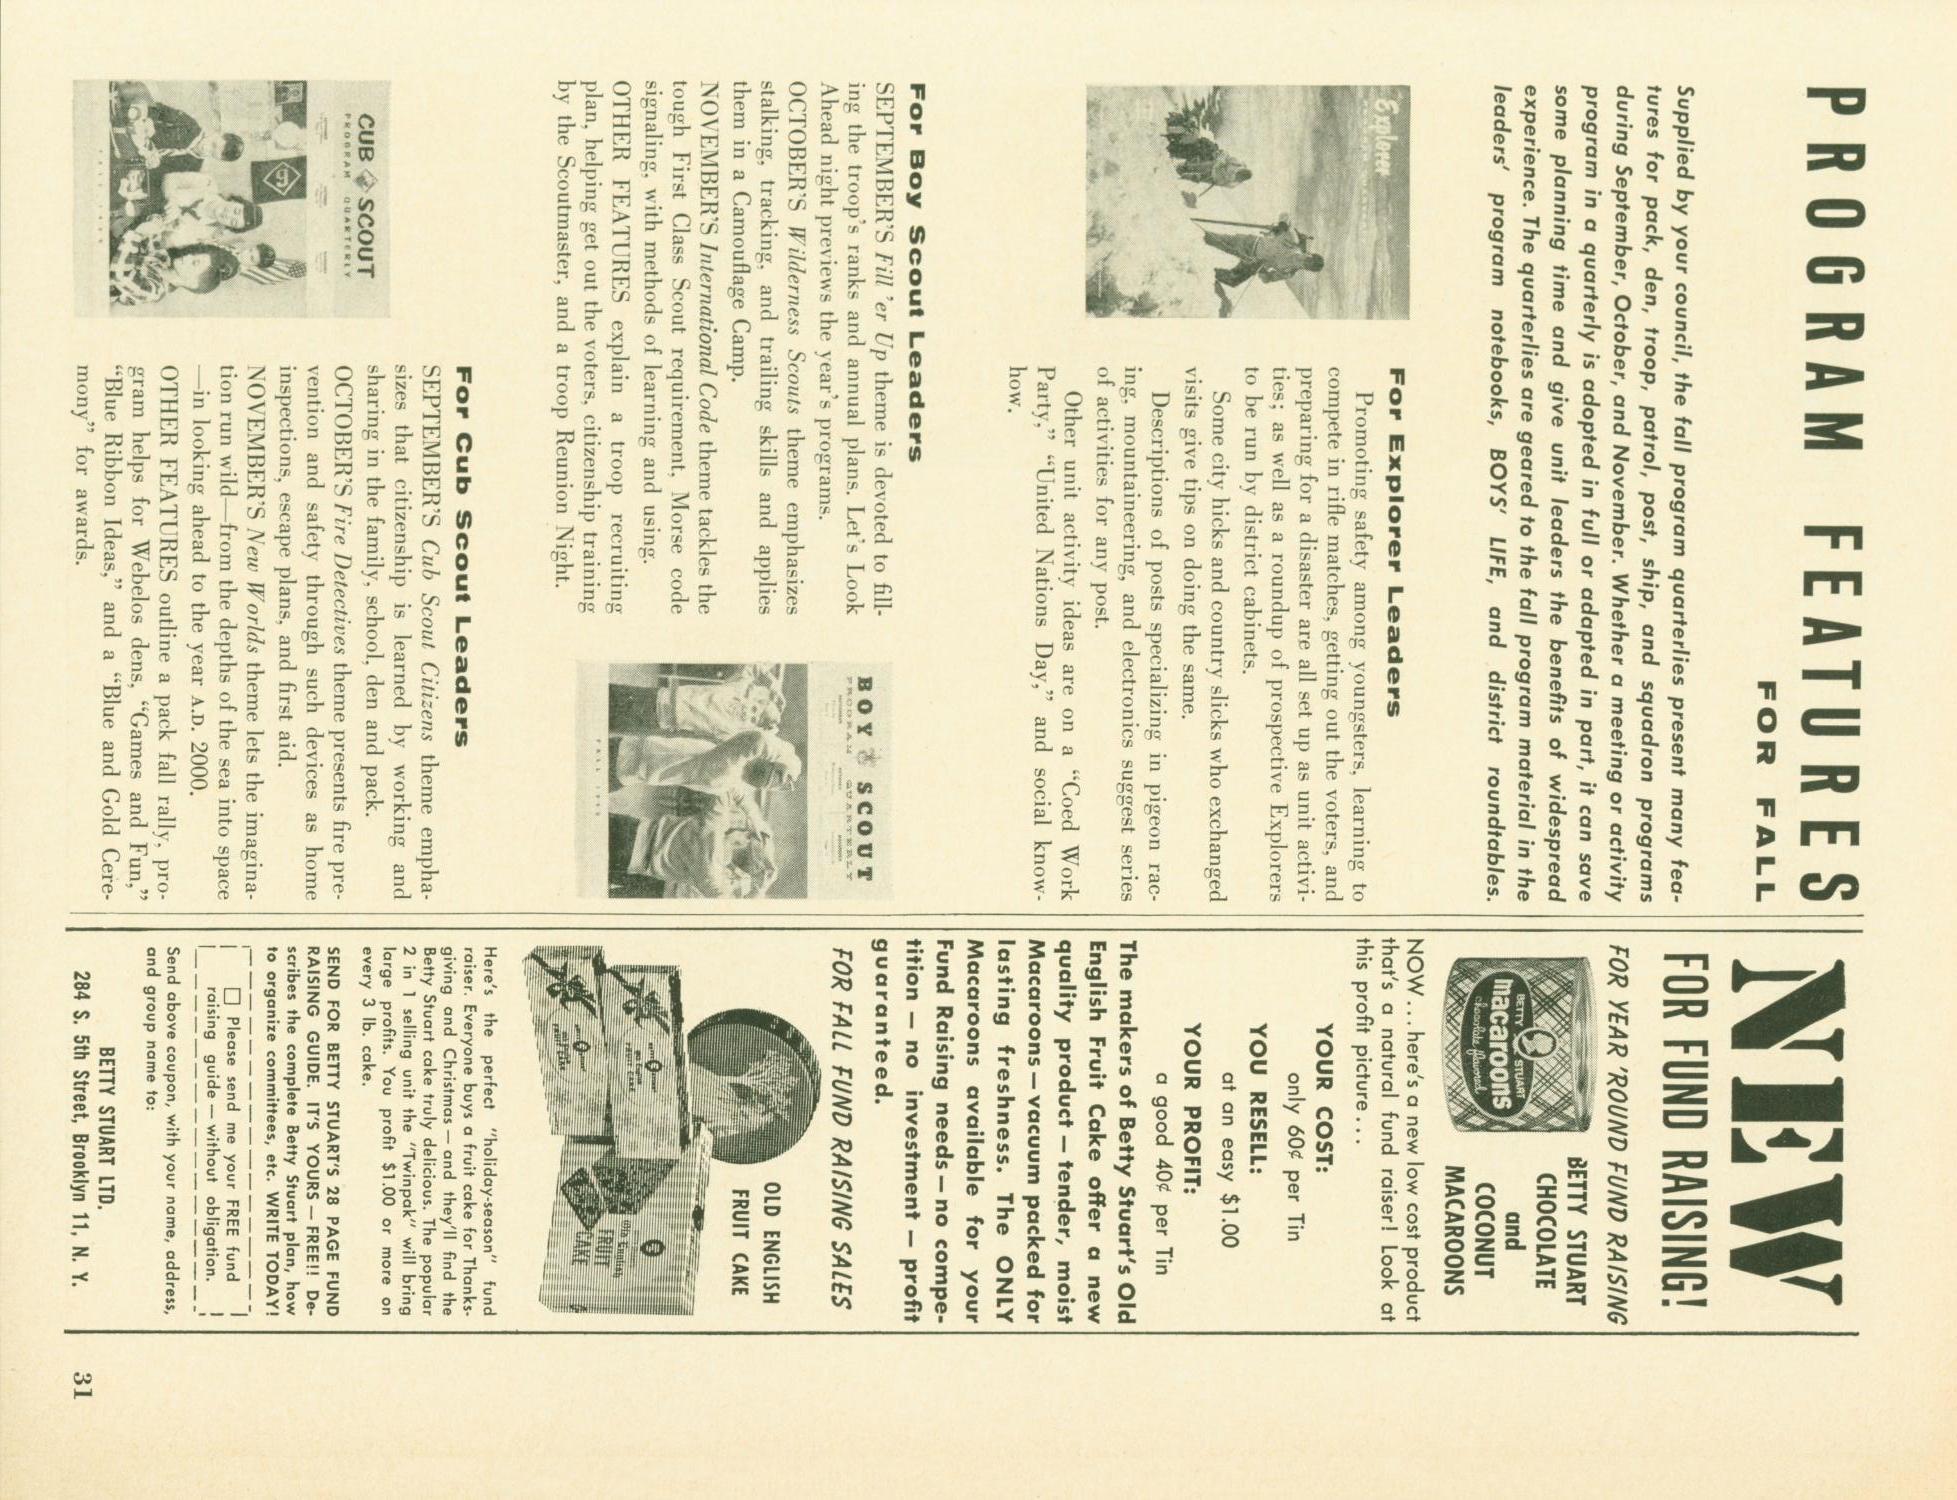 Scouting, Volume 48, Number 6, August-September 1960
                                                
                                                    31
                                                